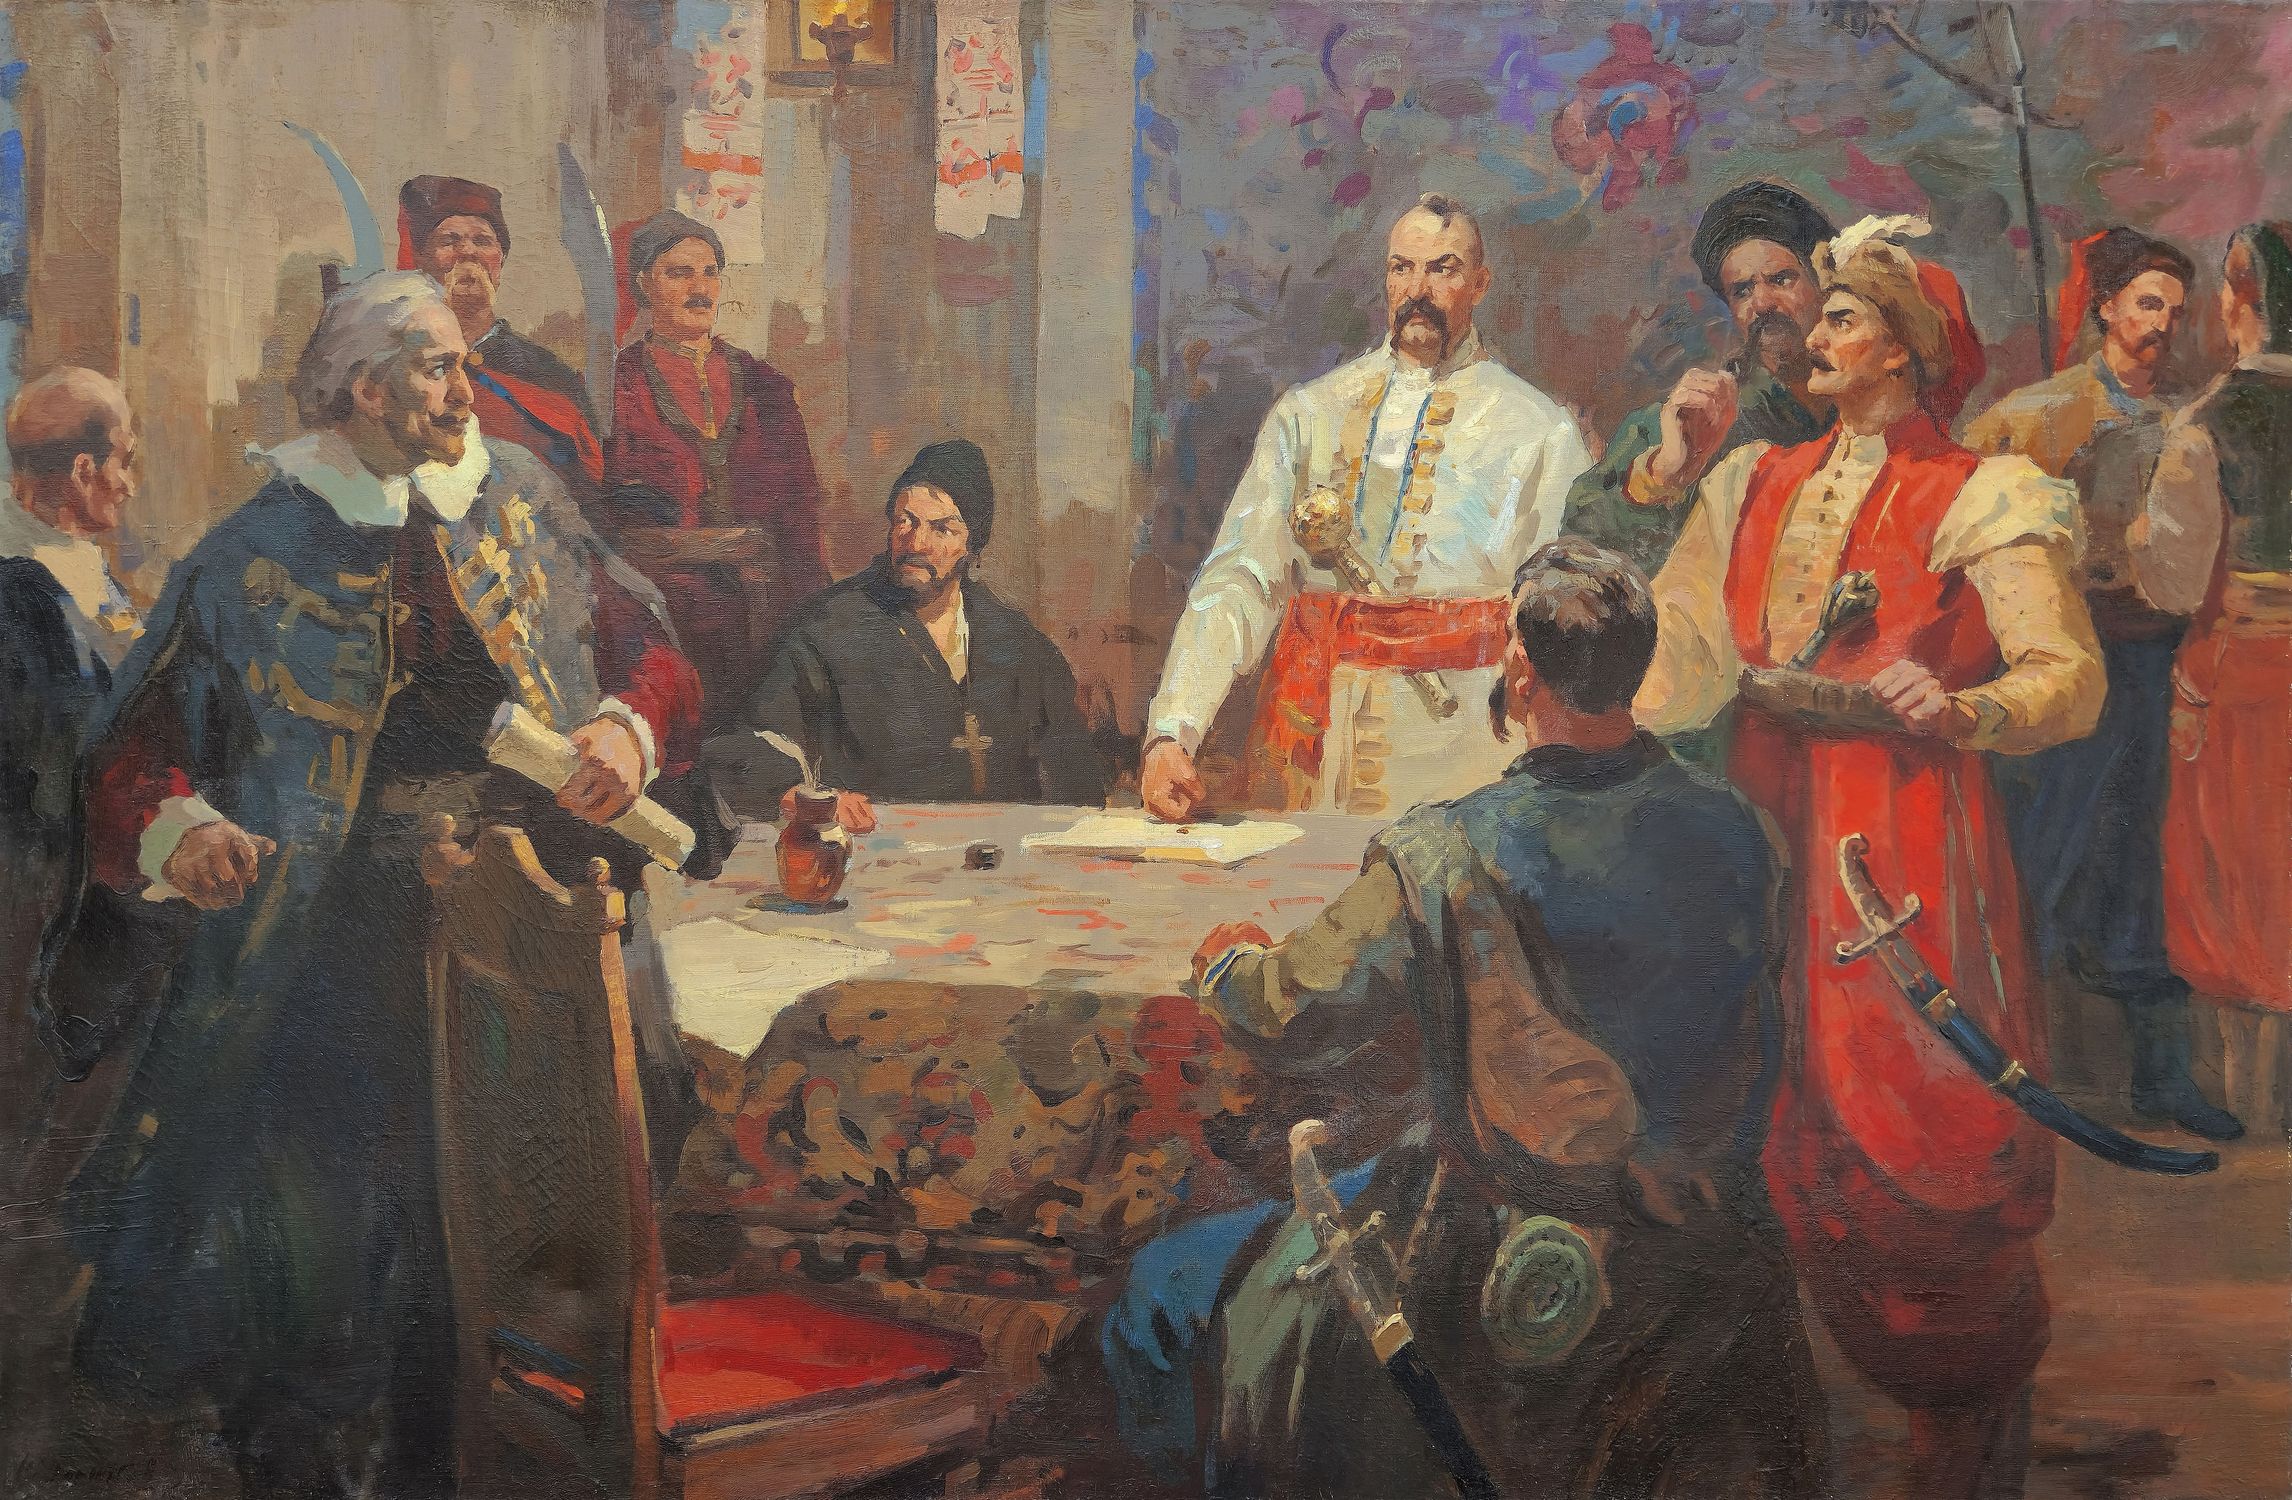 "Negotiations with the Polish troops"